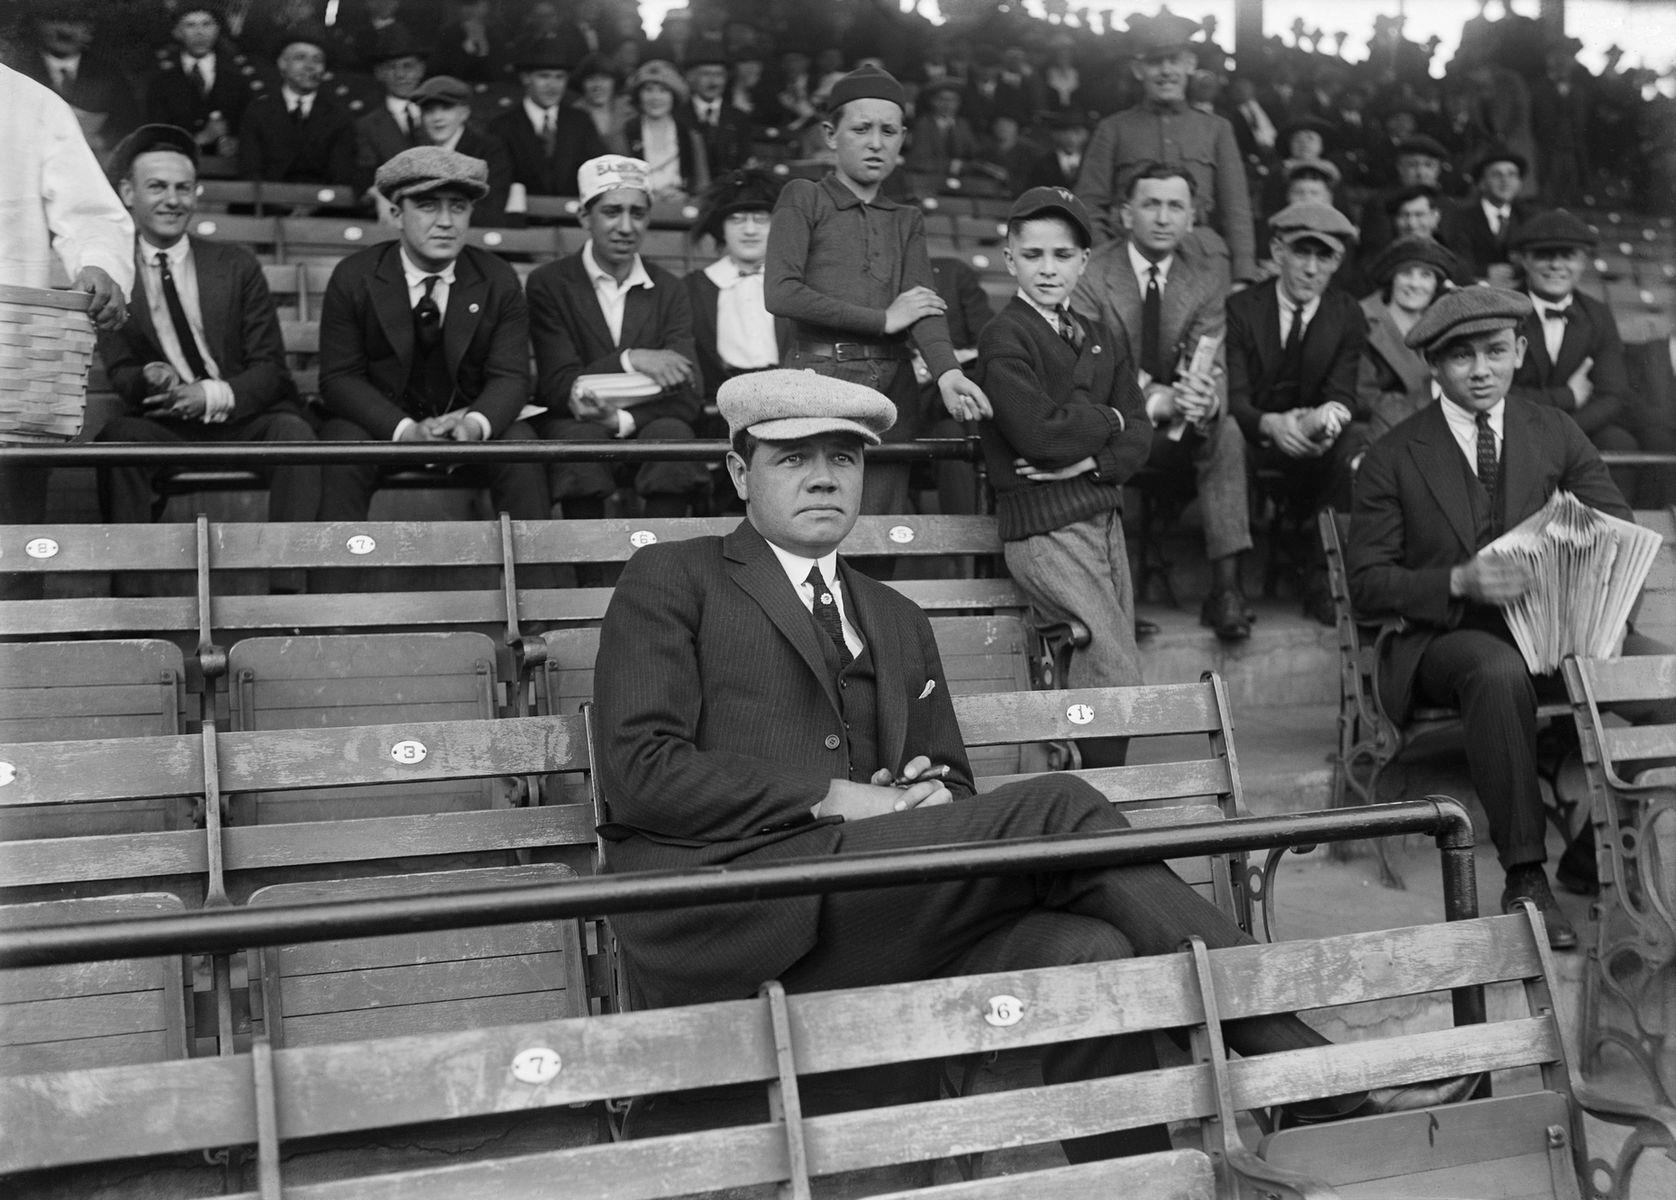 <p>In 1922, <a href="https://calltothepen.com/2011/12/18/baseball-history-babe-ruths-1921-suspension/">Babe Ruth</a> of the New York Yankees was suspended three times, once for barnstorming—participating in exhibition games for money—and twice more for “arguing and throwing dirt on an umpire [and] then cursing at another.”</p>